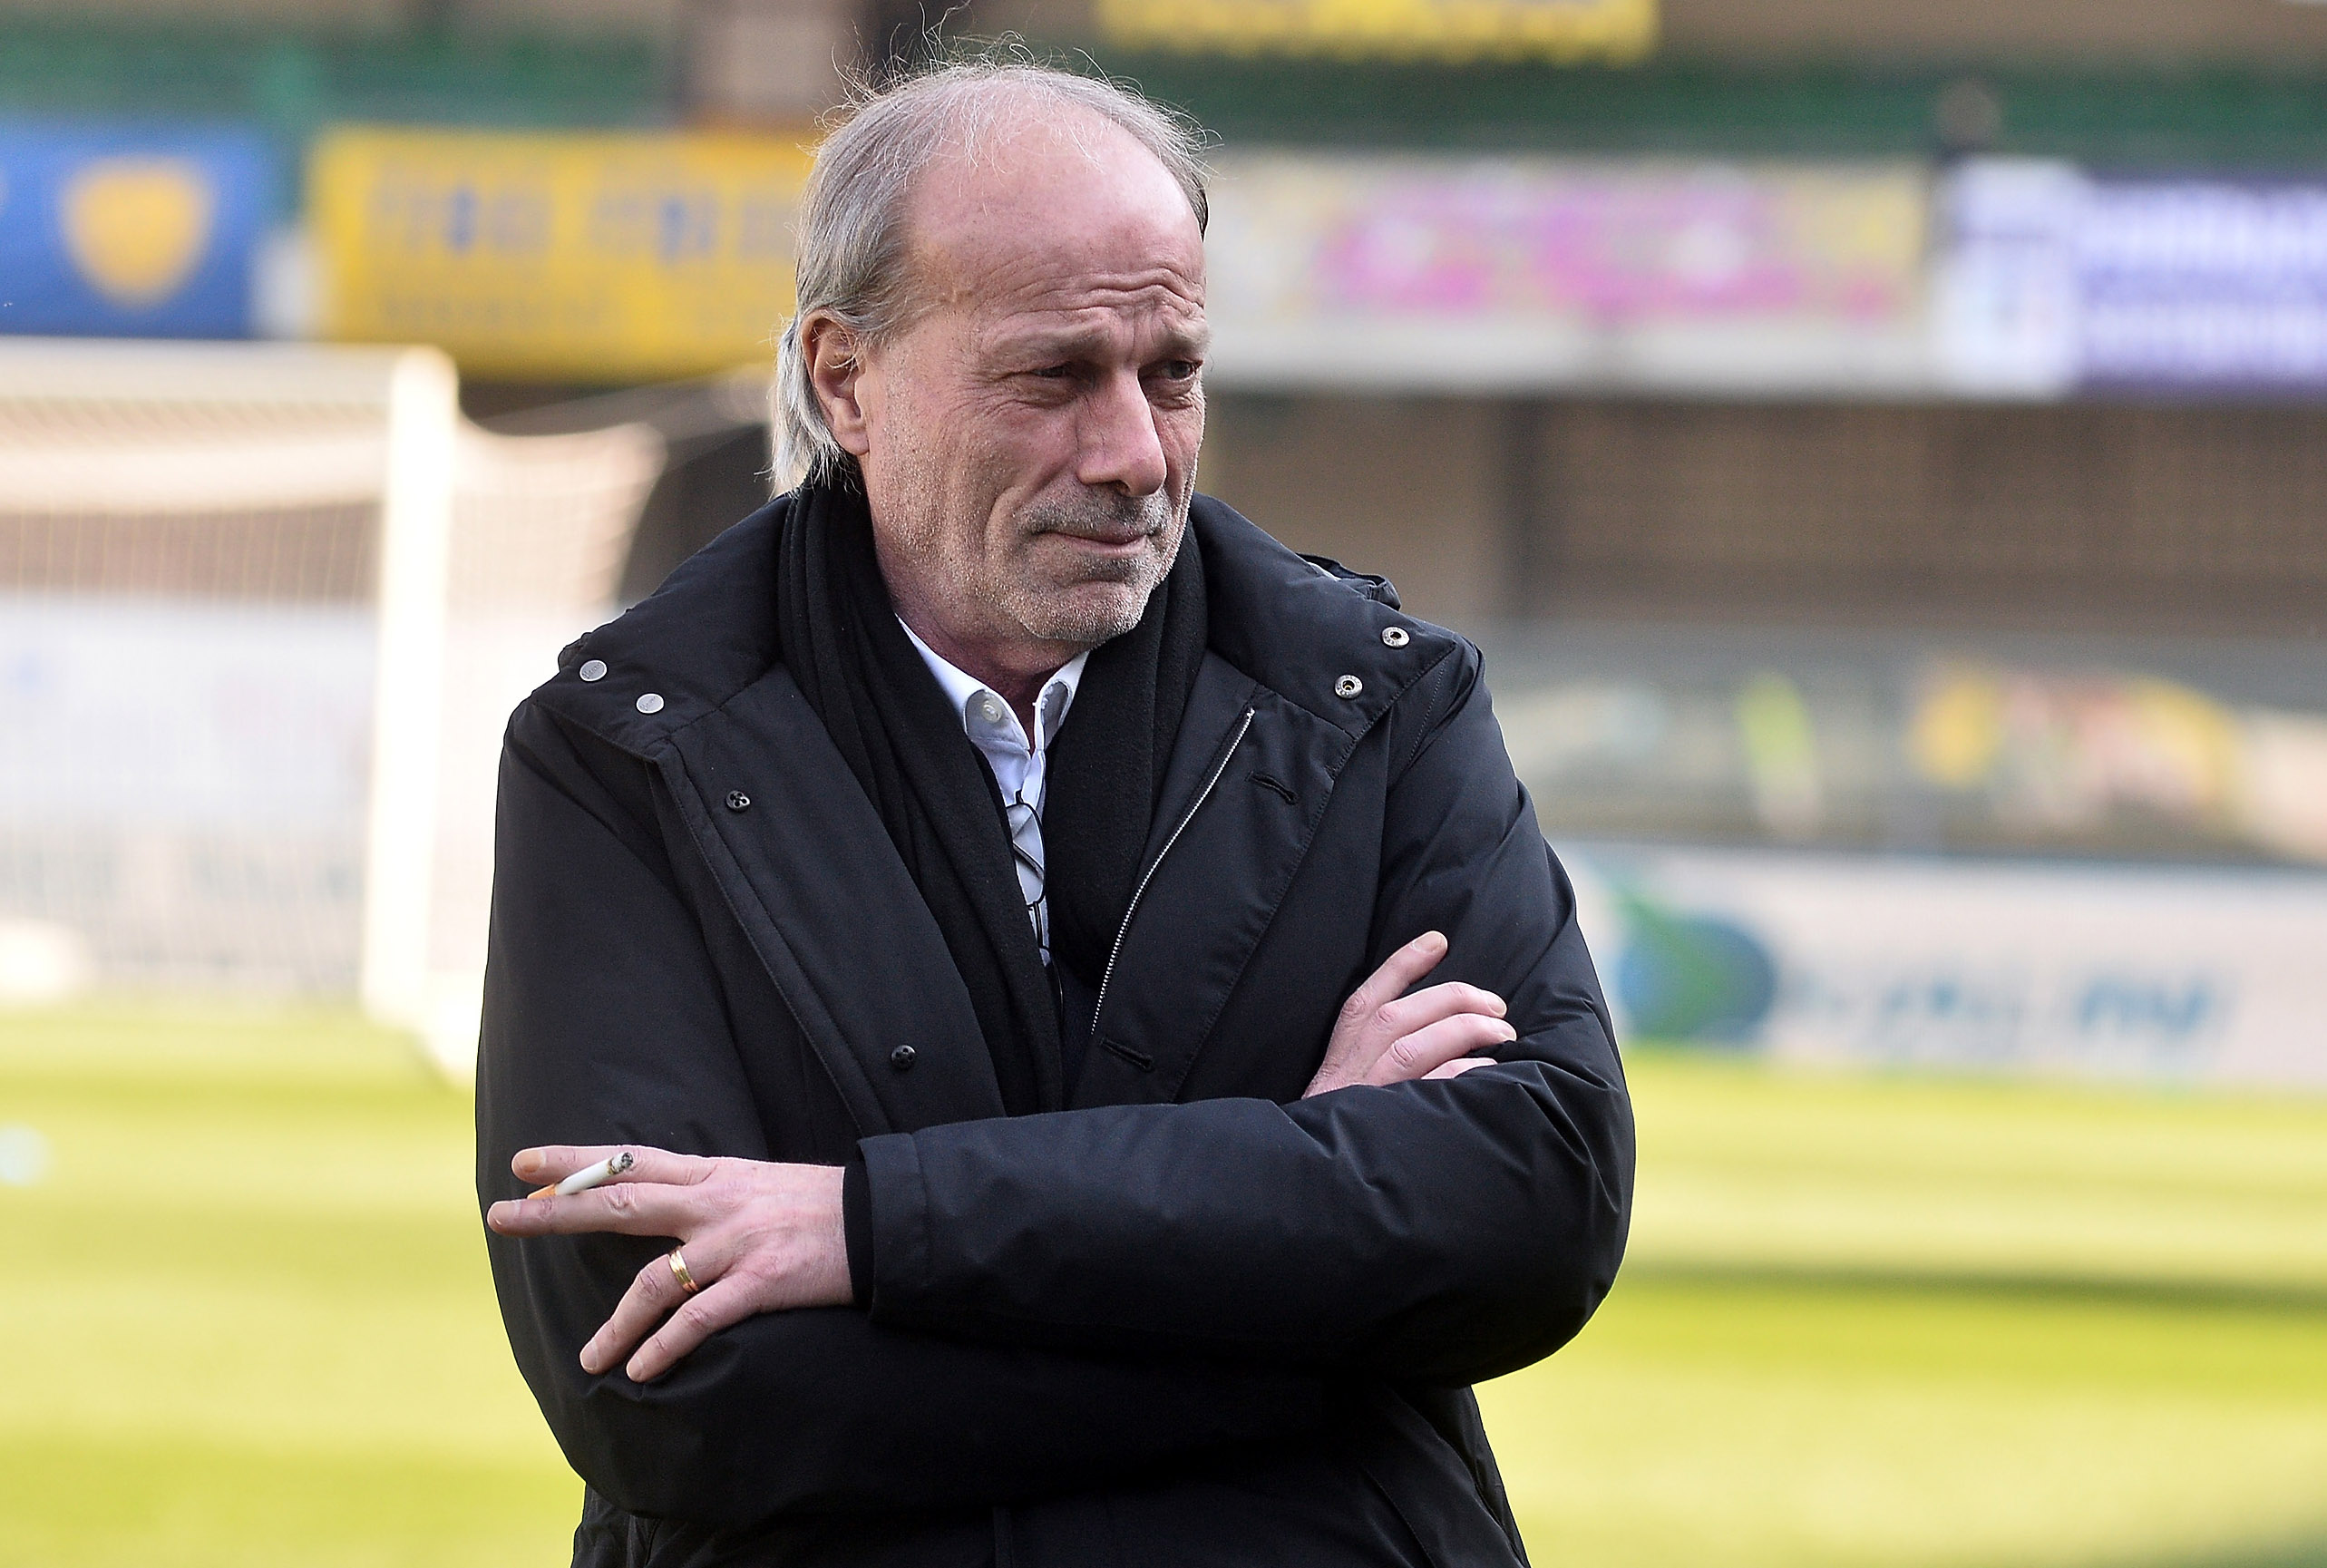 Walter Sabatini: “Painful Decision To Leave, I Want To Apologize To Inter’s Fans”